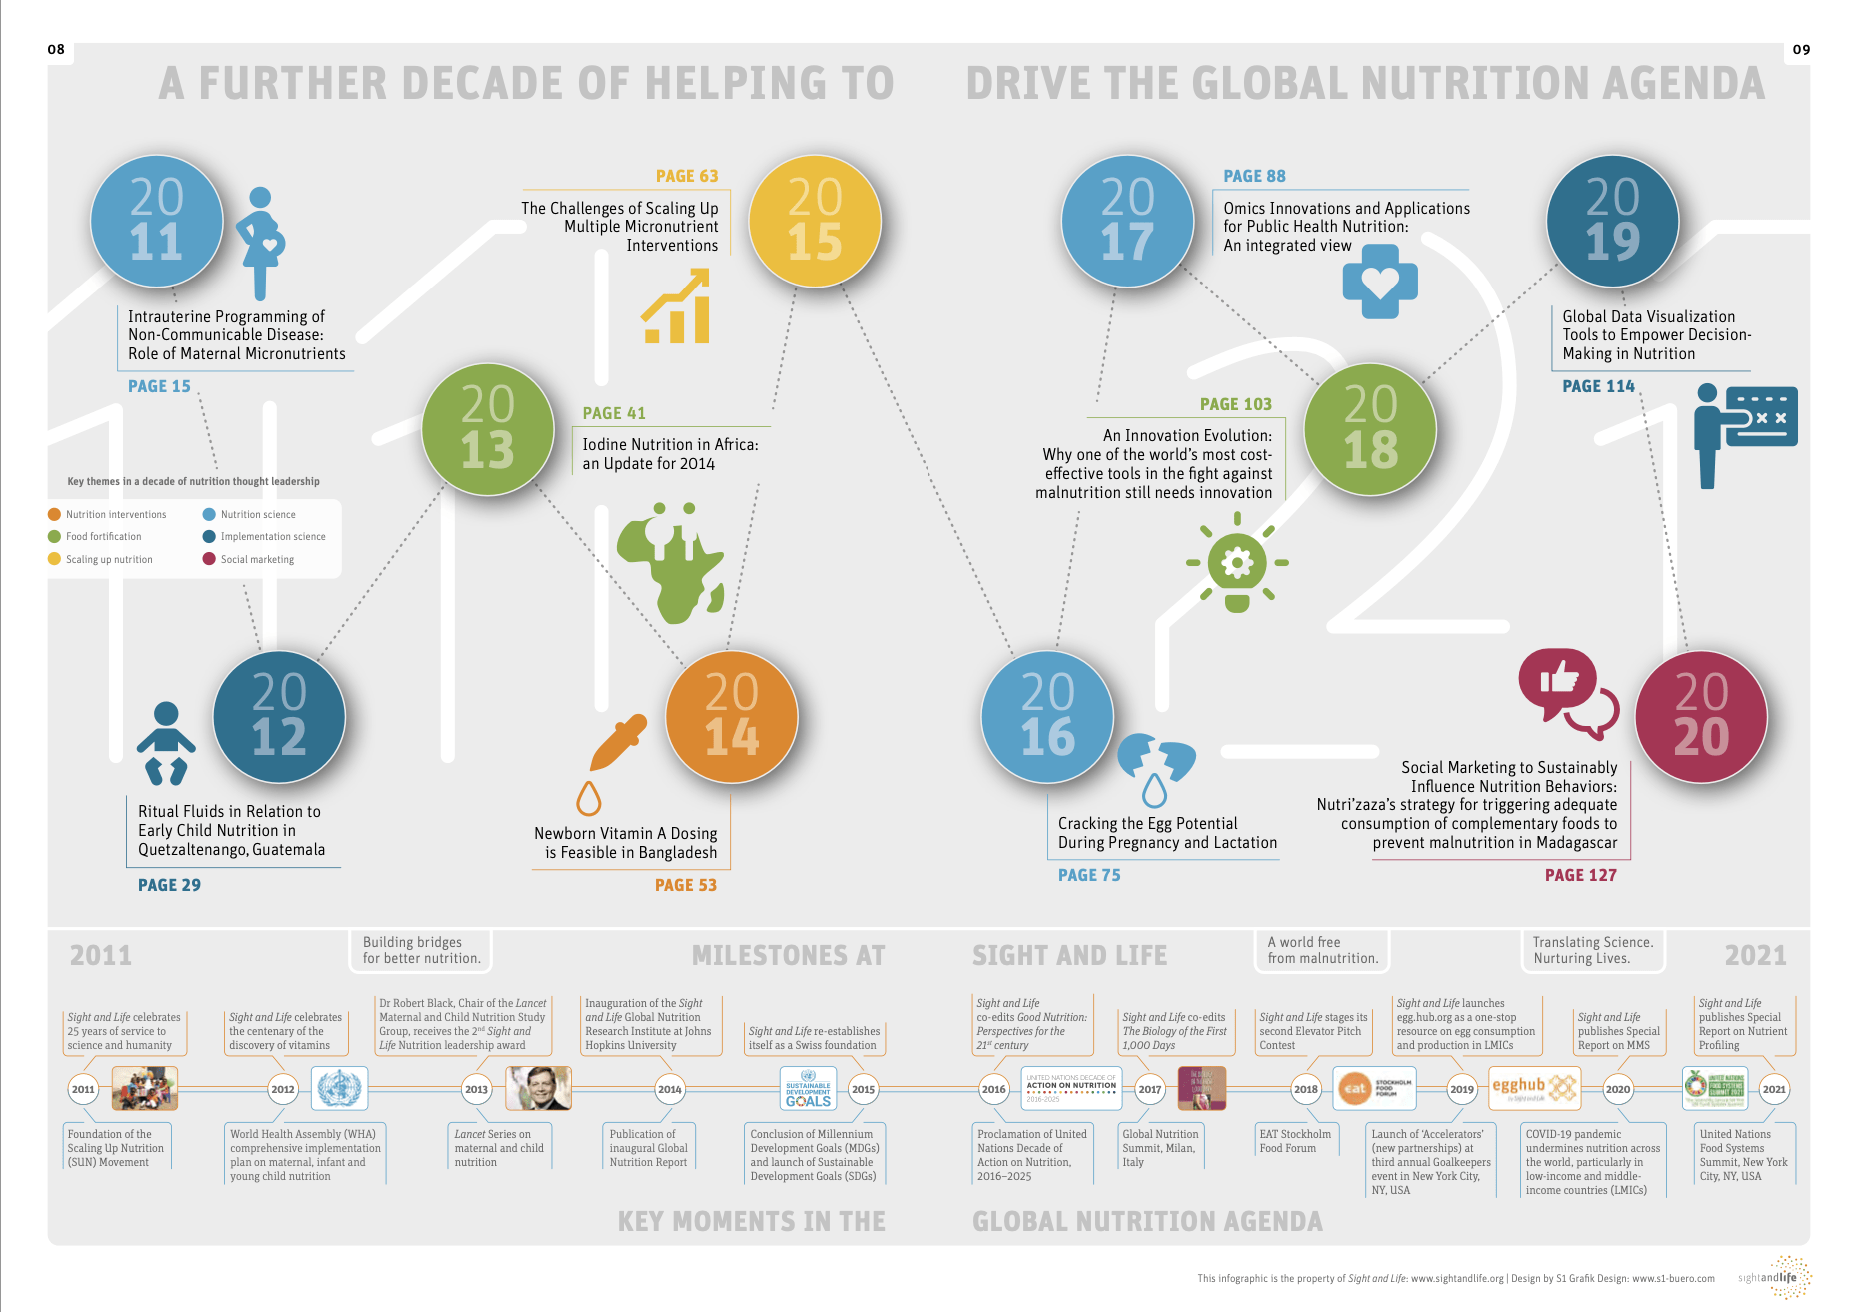 A Further Decade of Helping to Drive the Global Nutrition Agenda